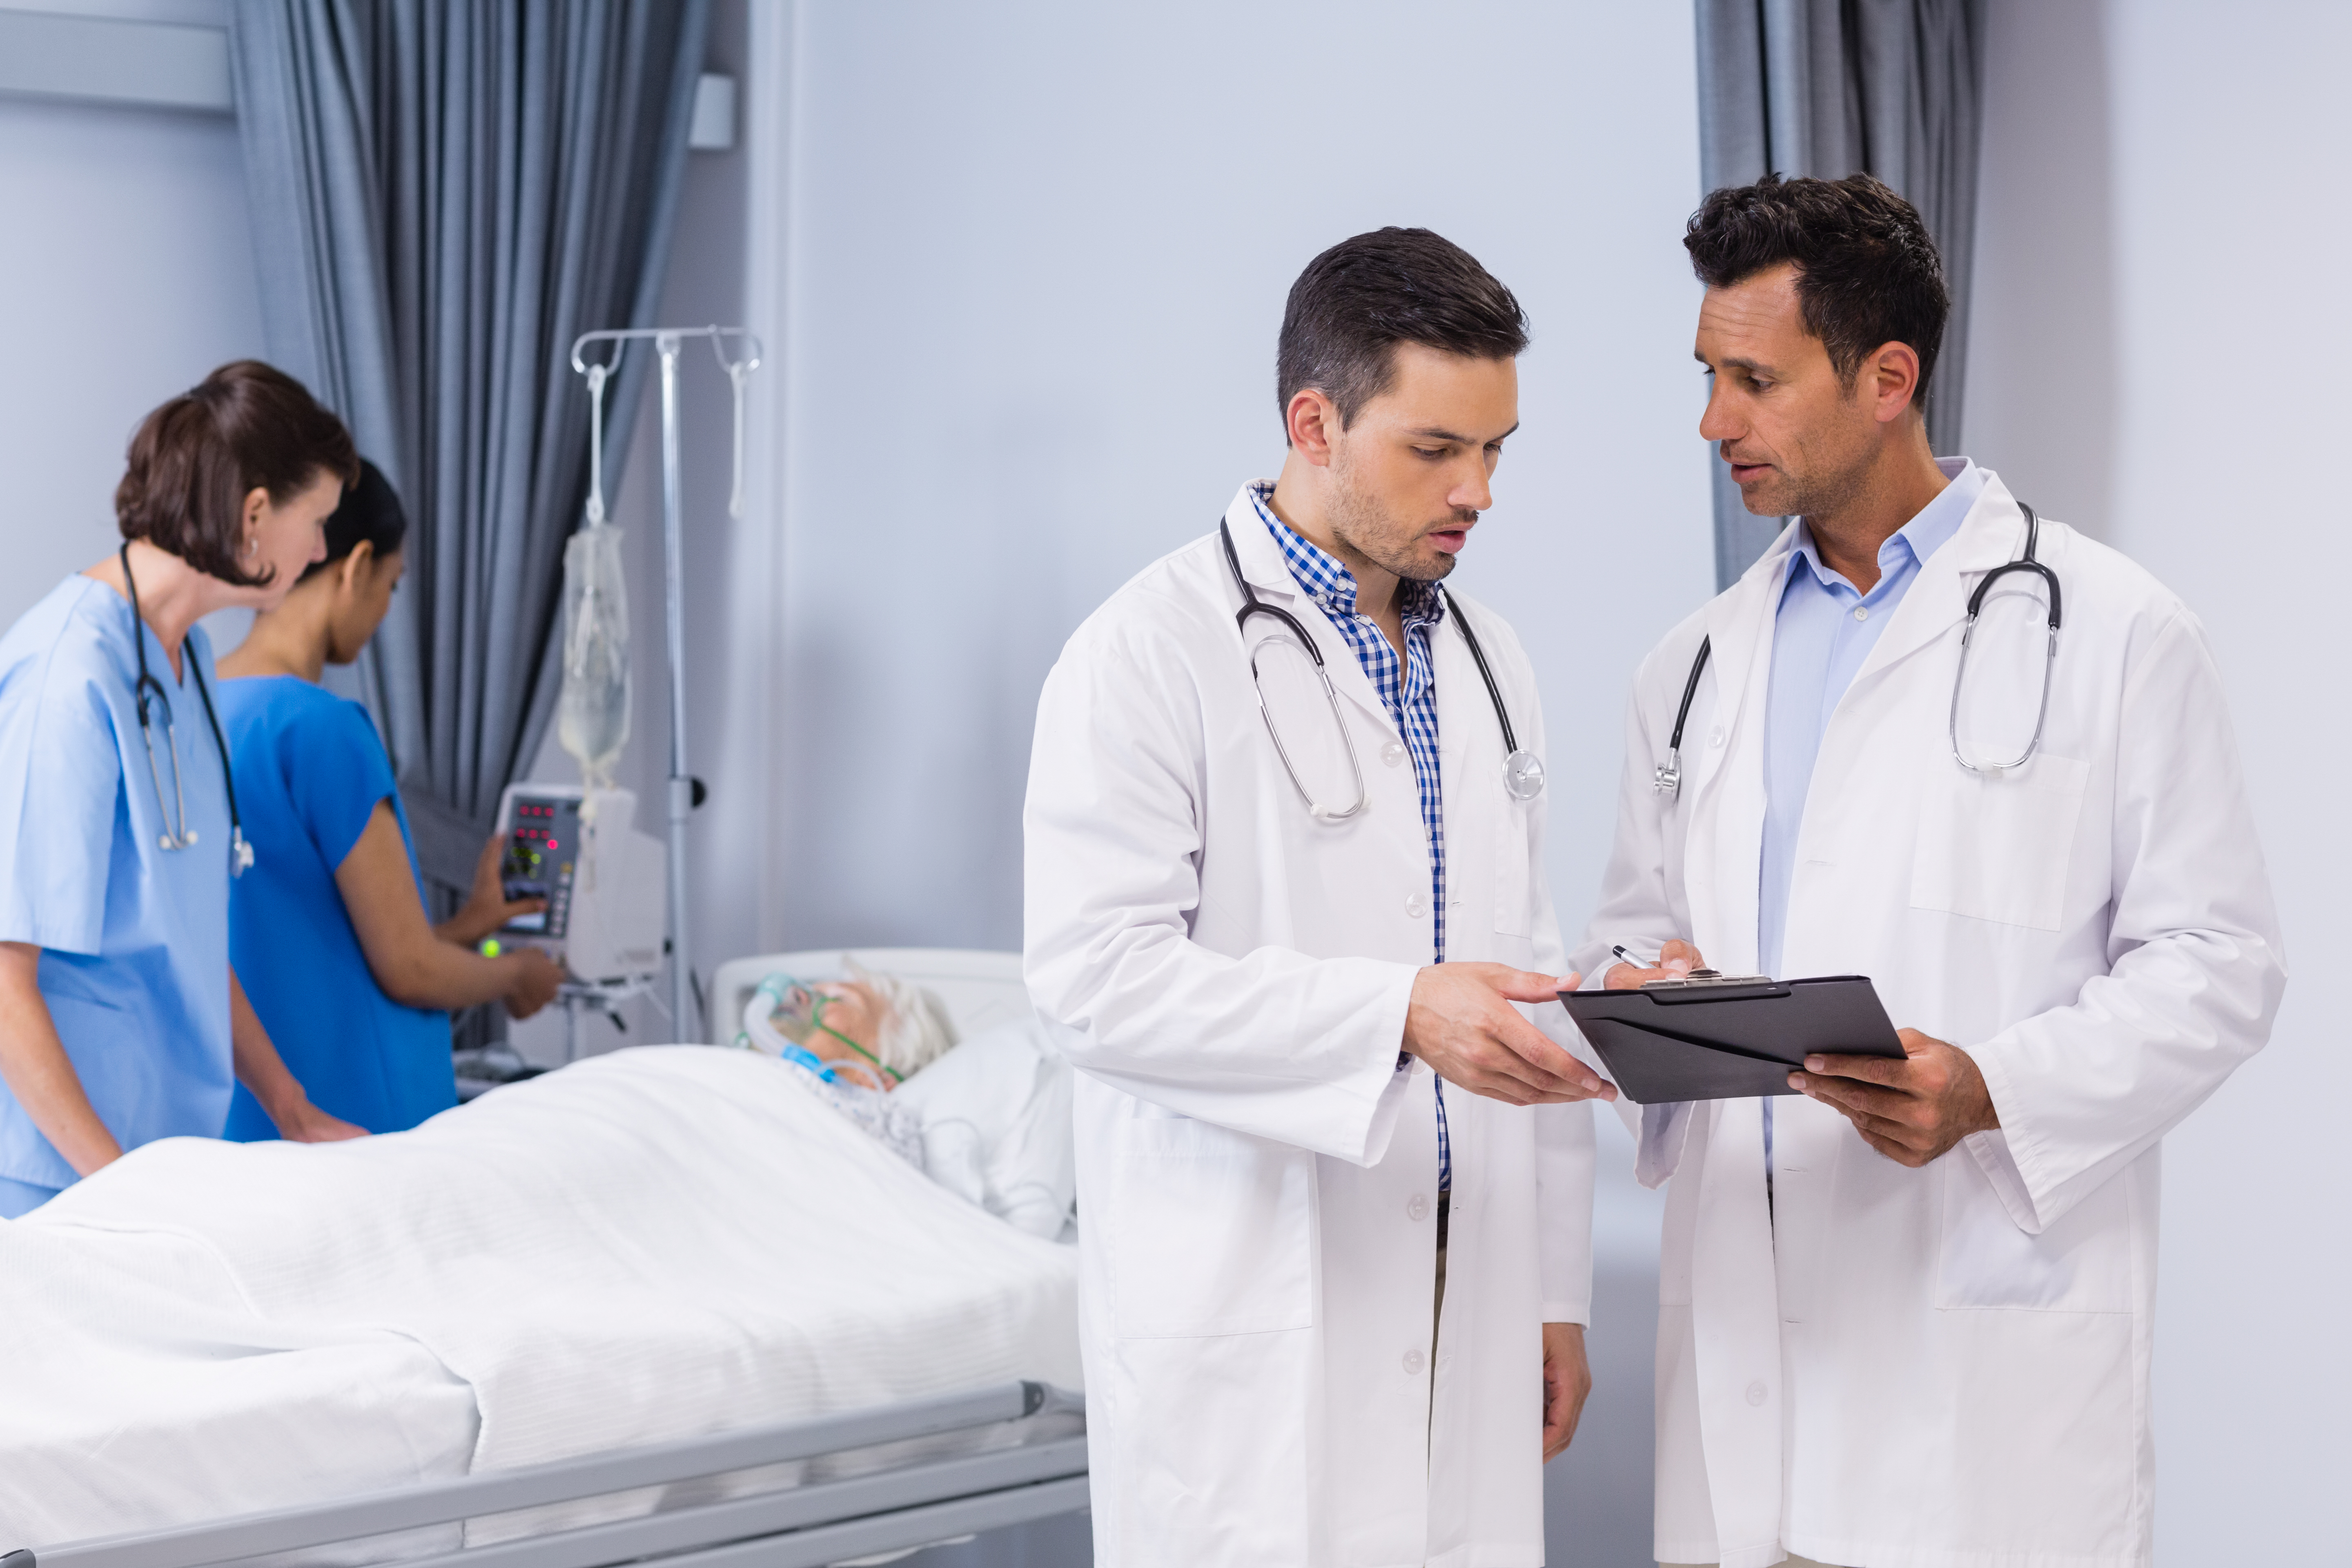 Two doctors discussing medical report in hospital room